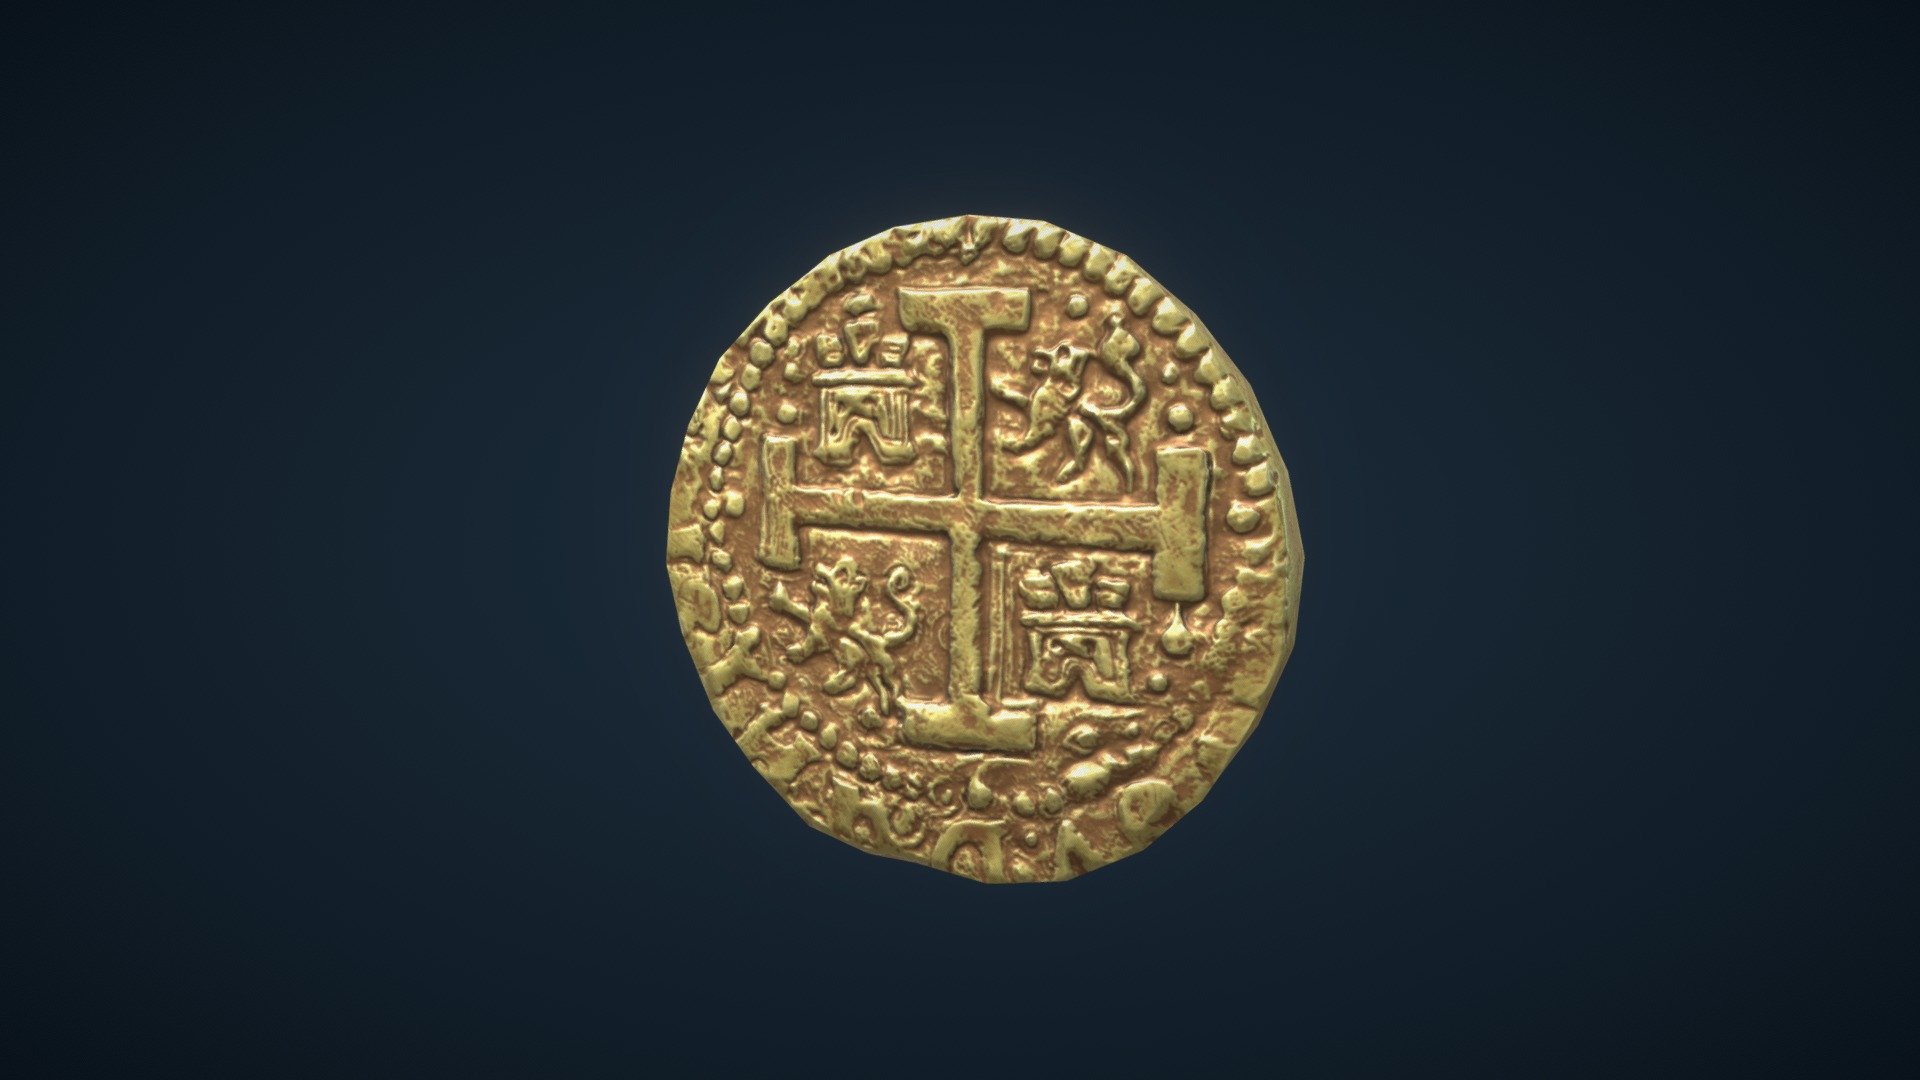 Pirate Gold Doubloon